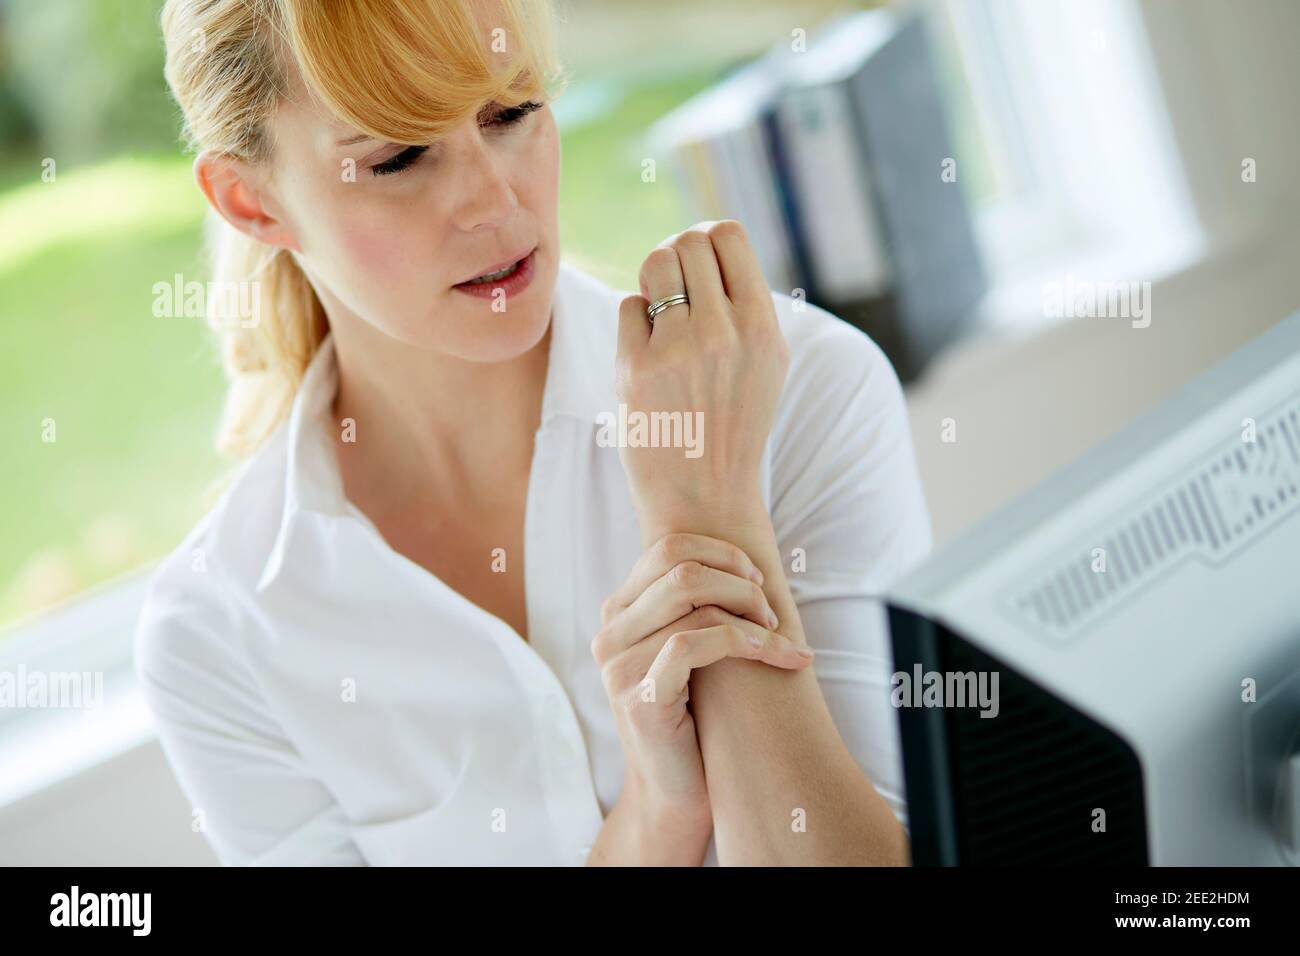 Woman holding her painful wrist Stock Photo